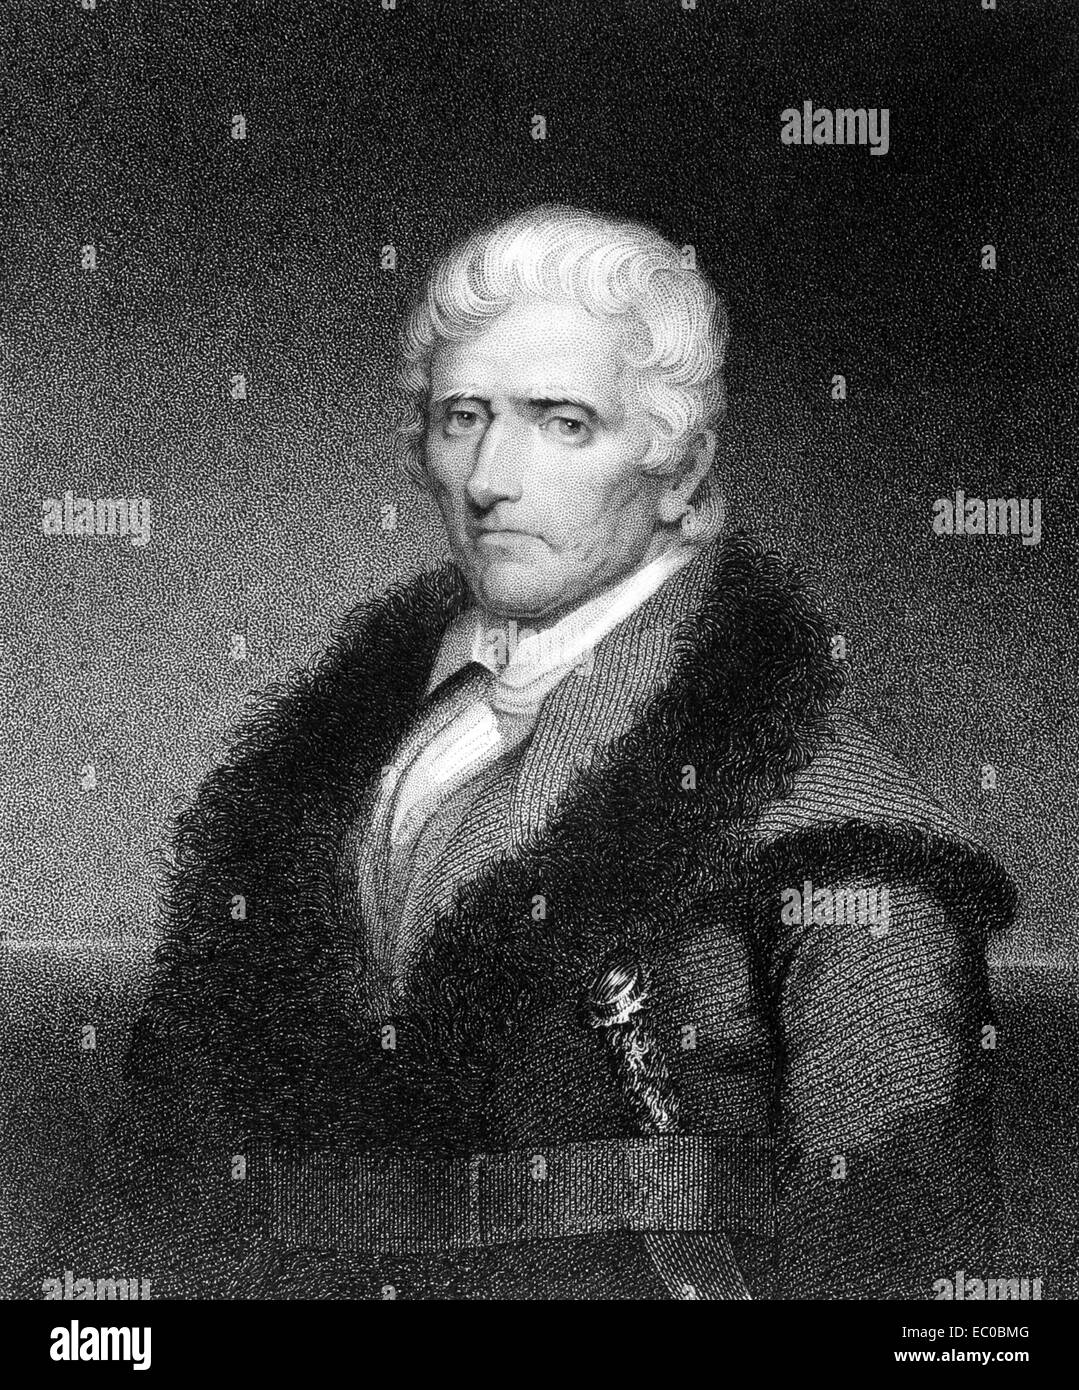 Daniel Boone (1734-1820) on engraving from 1835. American pioneer, explorer, and frontiersman. Stock Photo